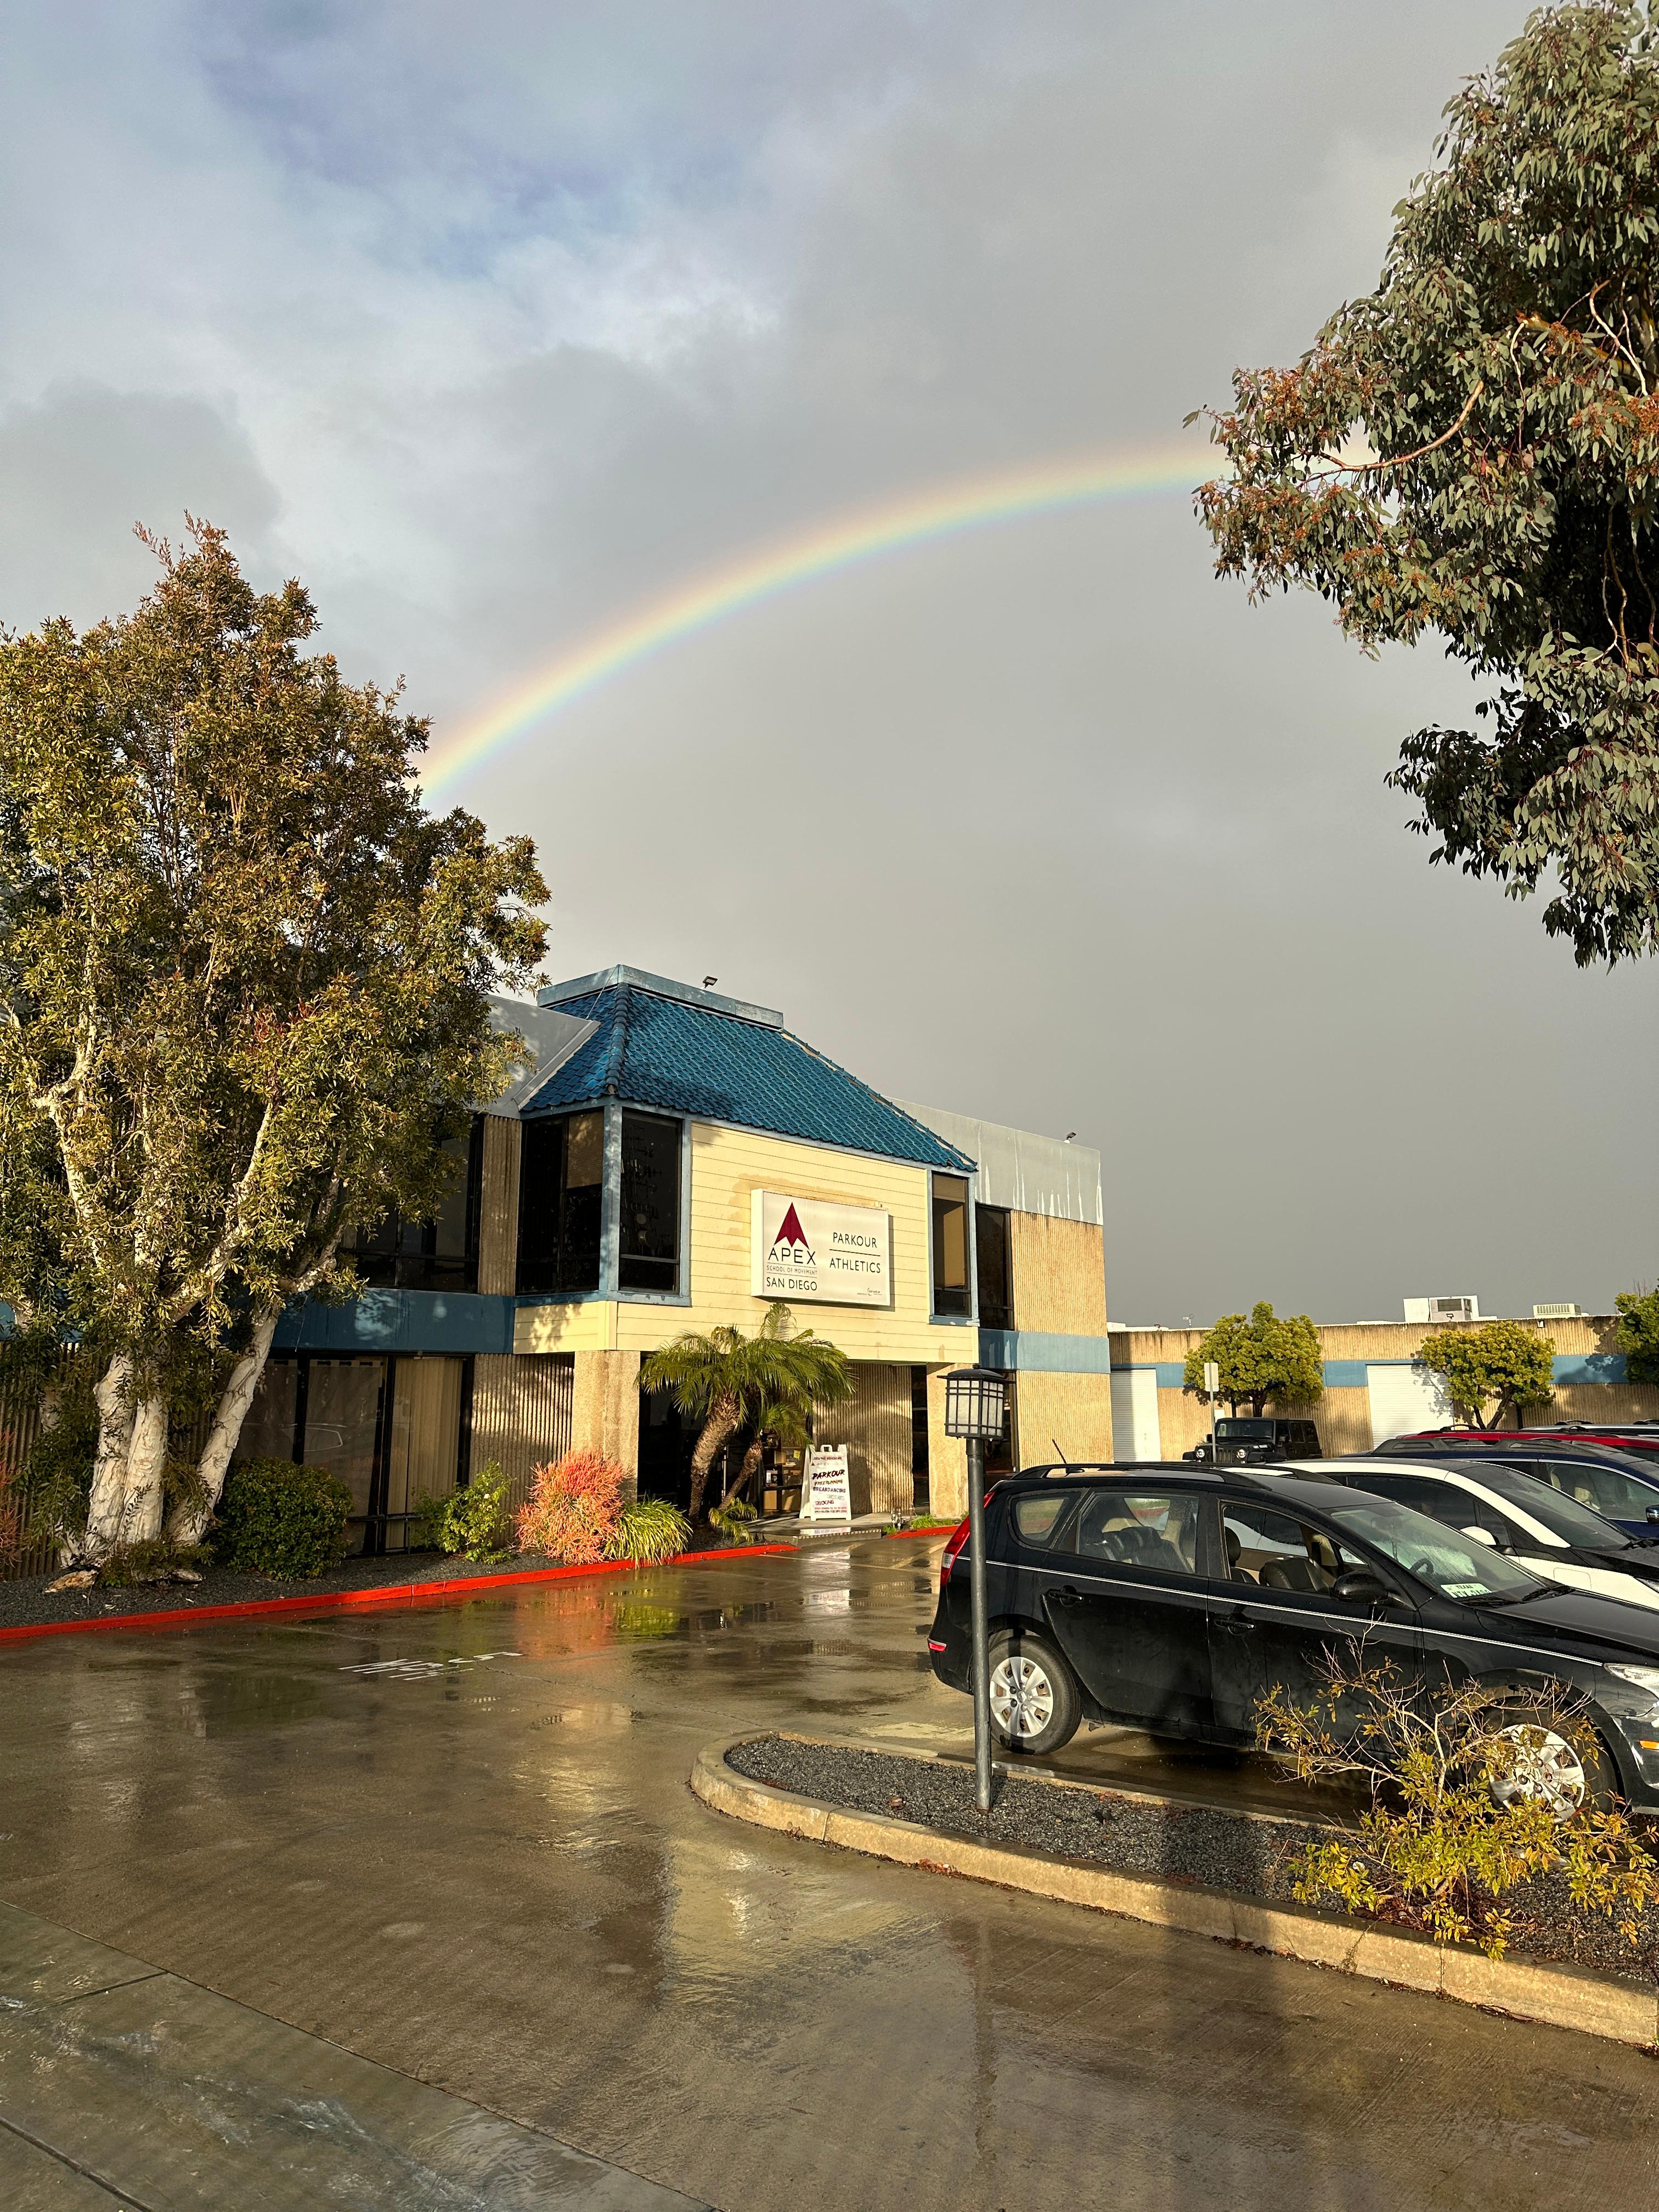 Find us at the base of the rainbow! APEX School of Movement San Diego San Diego (858)987-2355